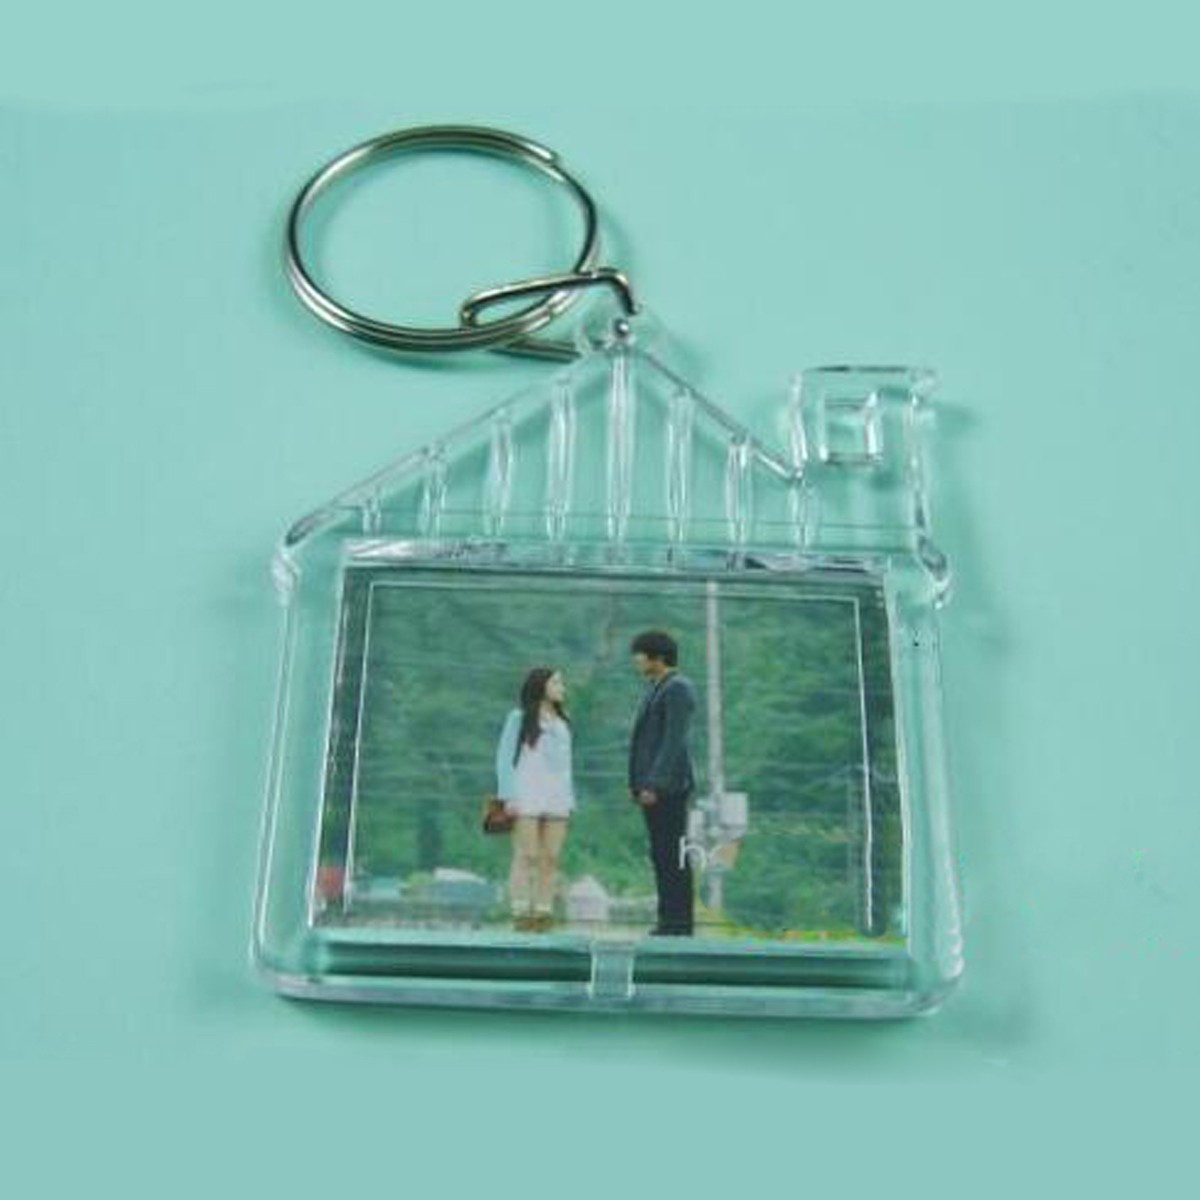 Photos-Pictures-Blank-Key-Ring-Duplex-Keychain-1036881-6